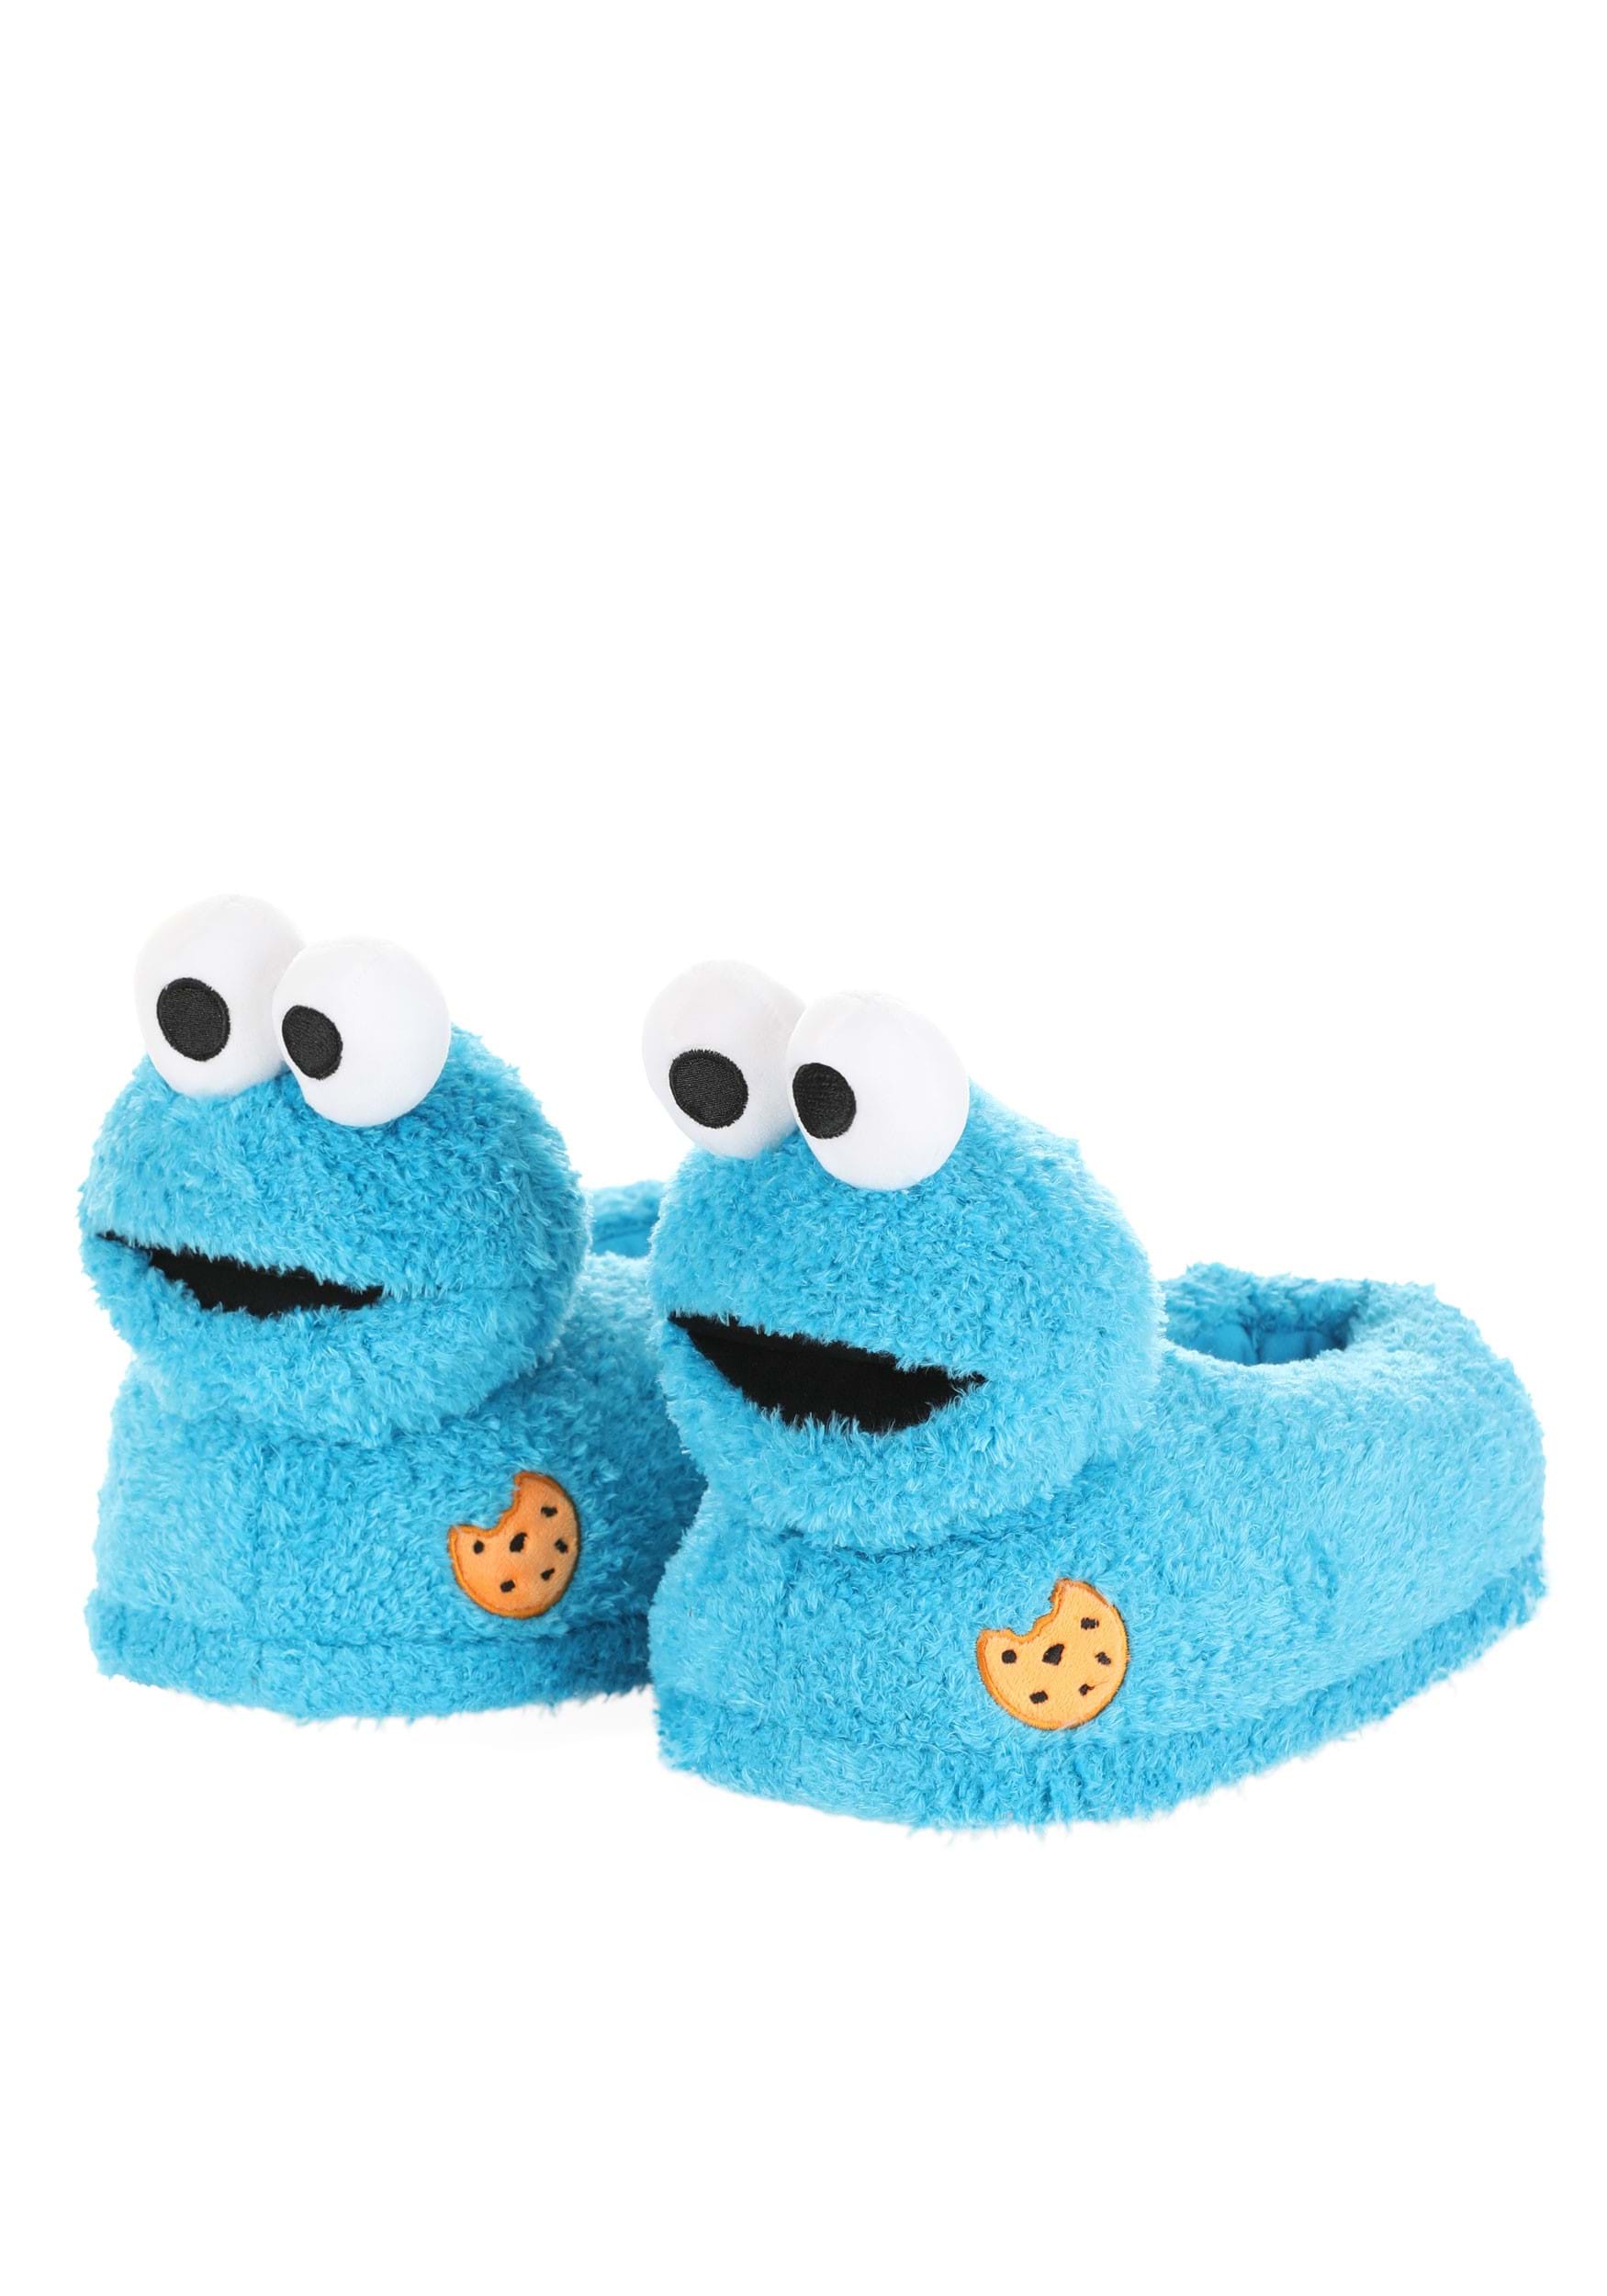 Cookie Monster Adult Plush Slippers